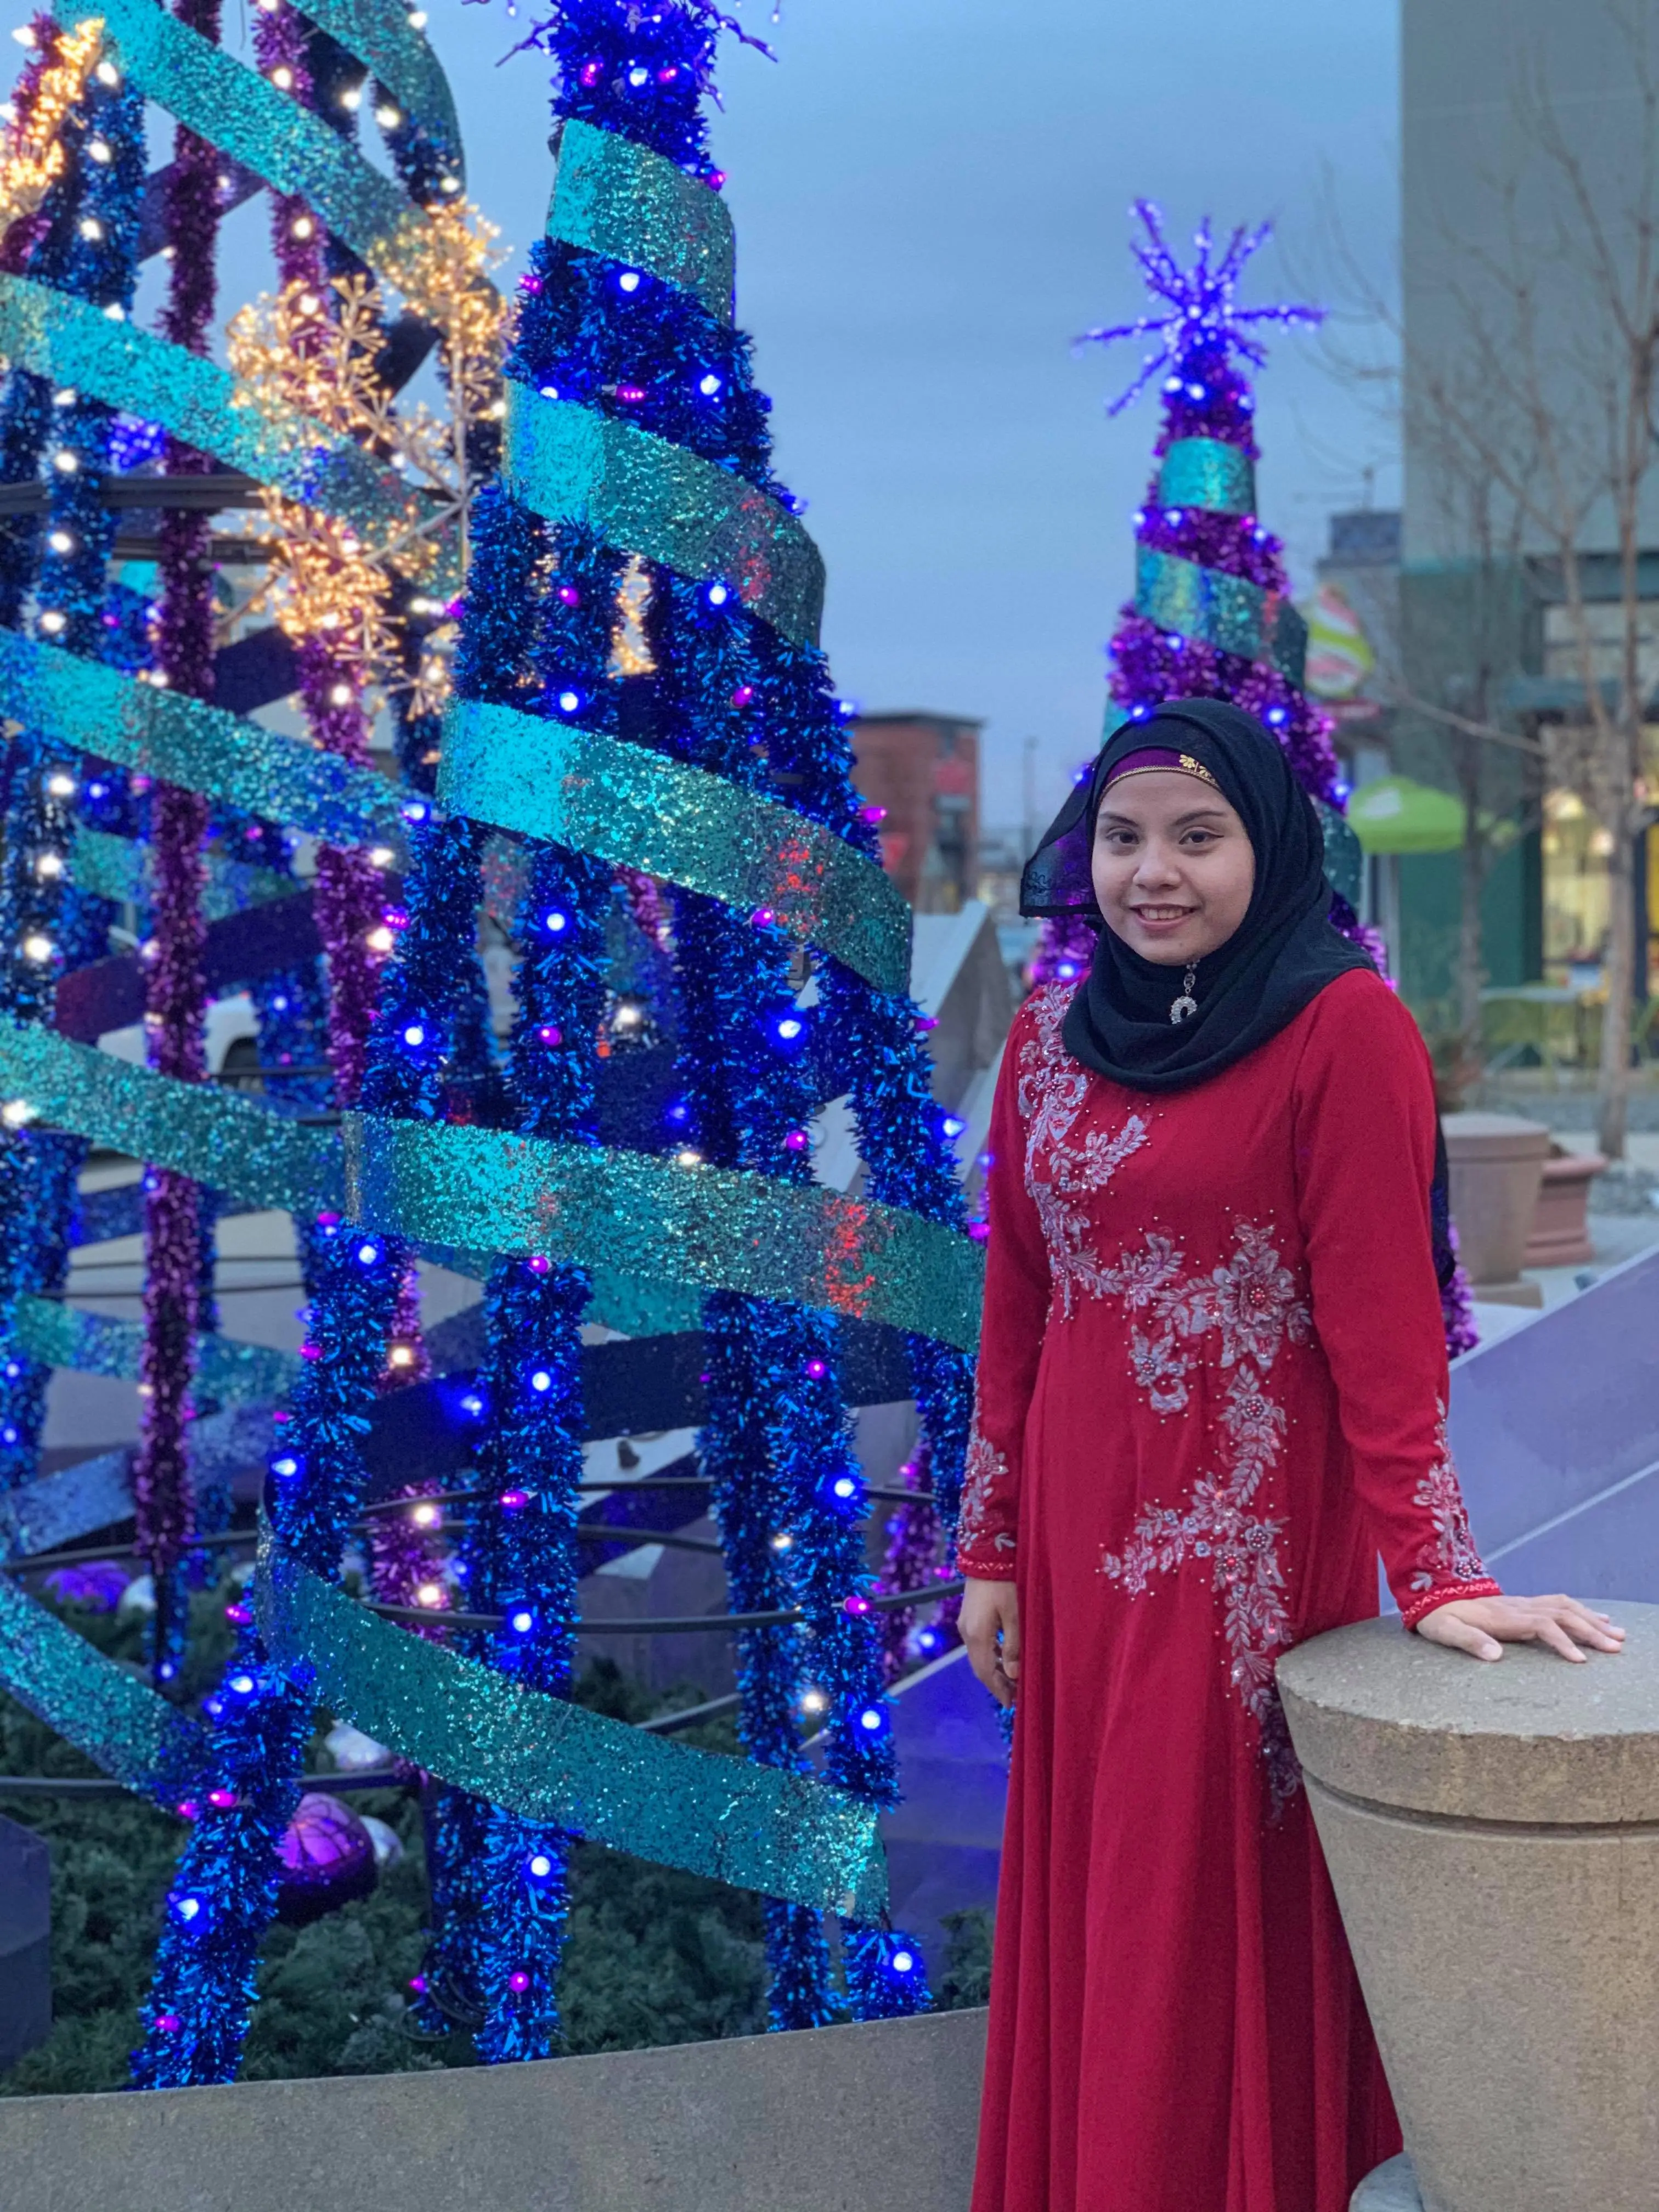 Shamsul poses with holiday decorations outside